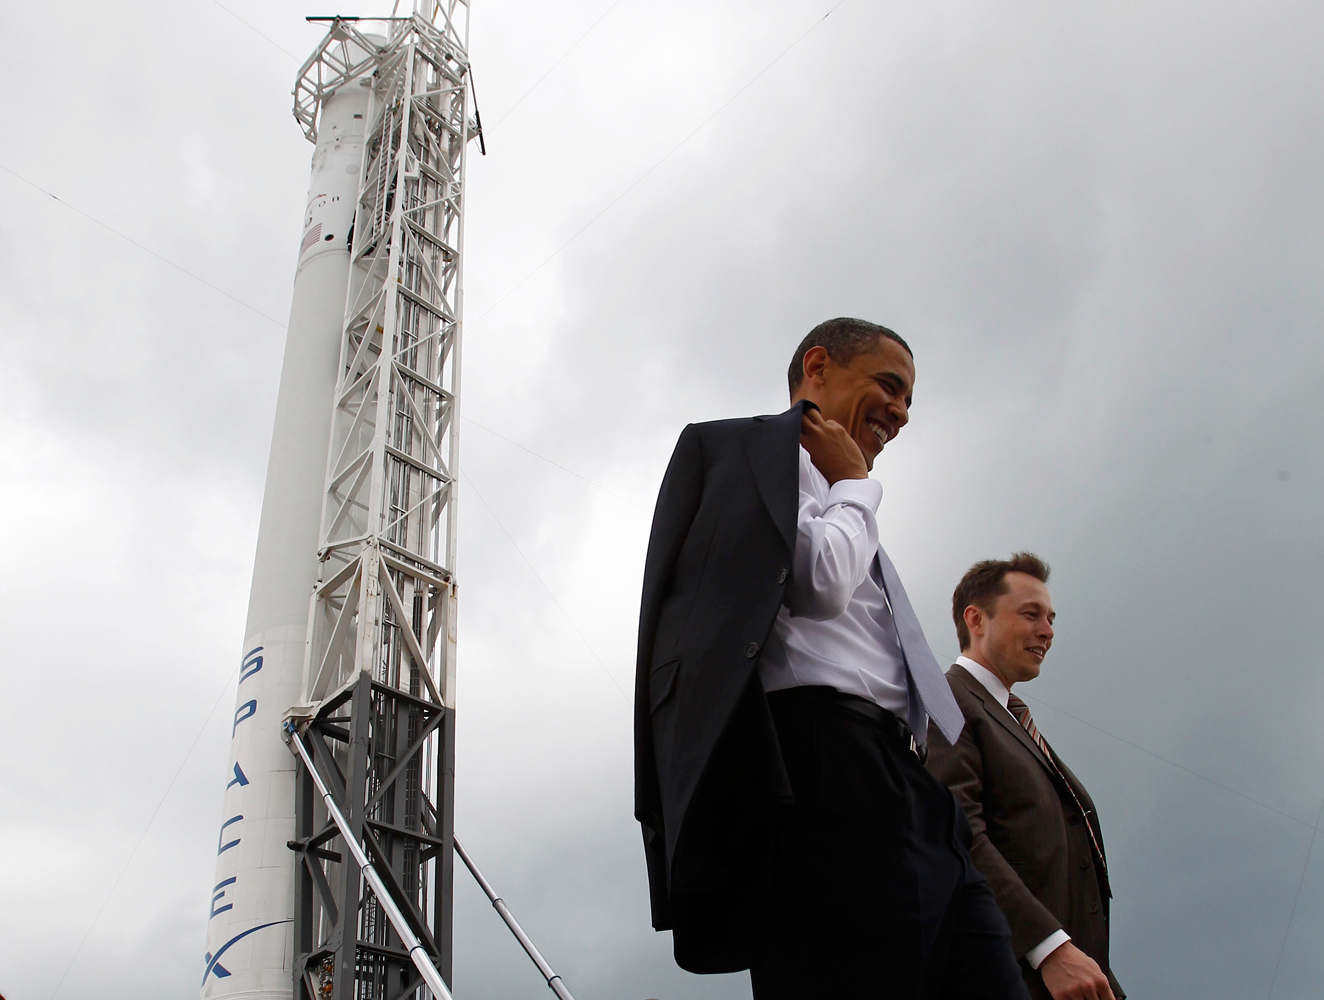 From left: President Barack Obama and Head of SpaceX Elon Musk tour Cape Canaveral, on April 15, 2010.